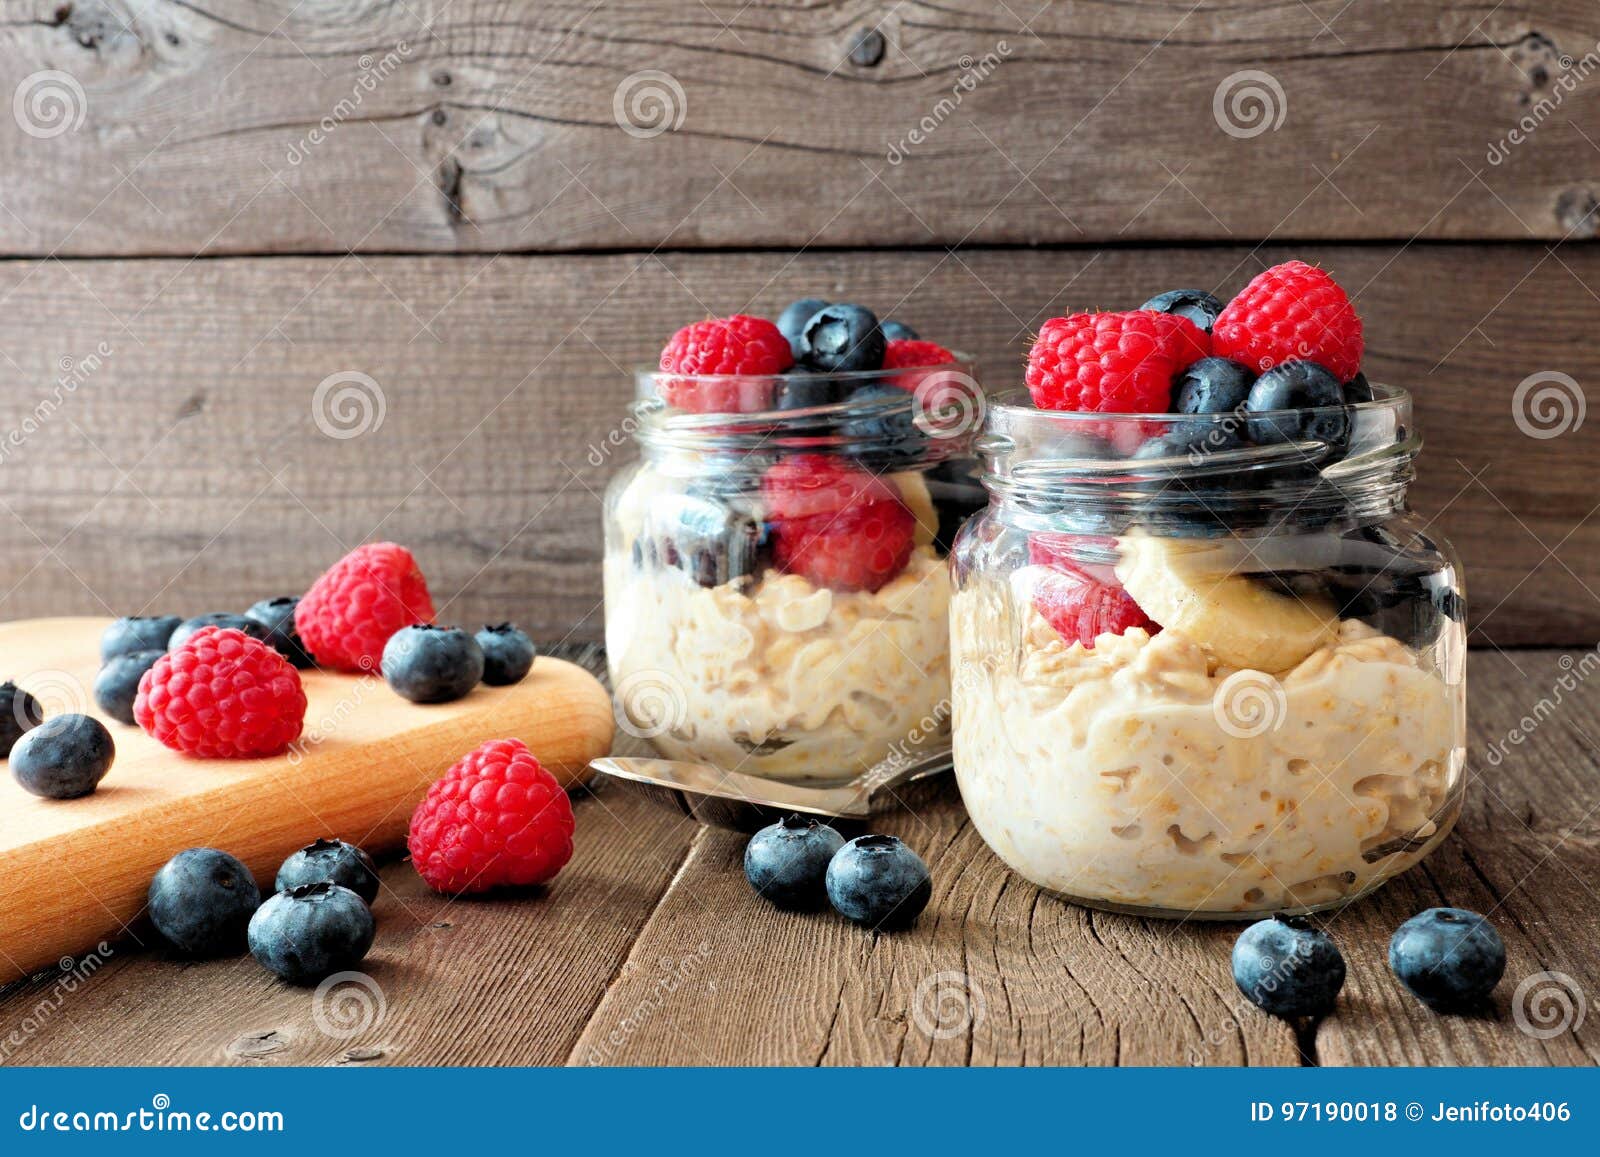 overnight oats with blueberries and raspberries in jars on rustic wood